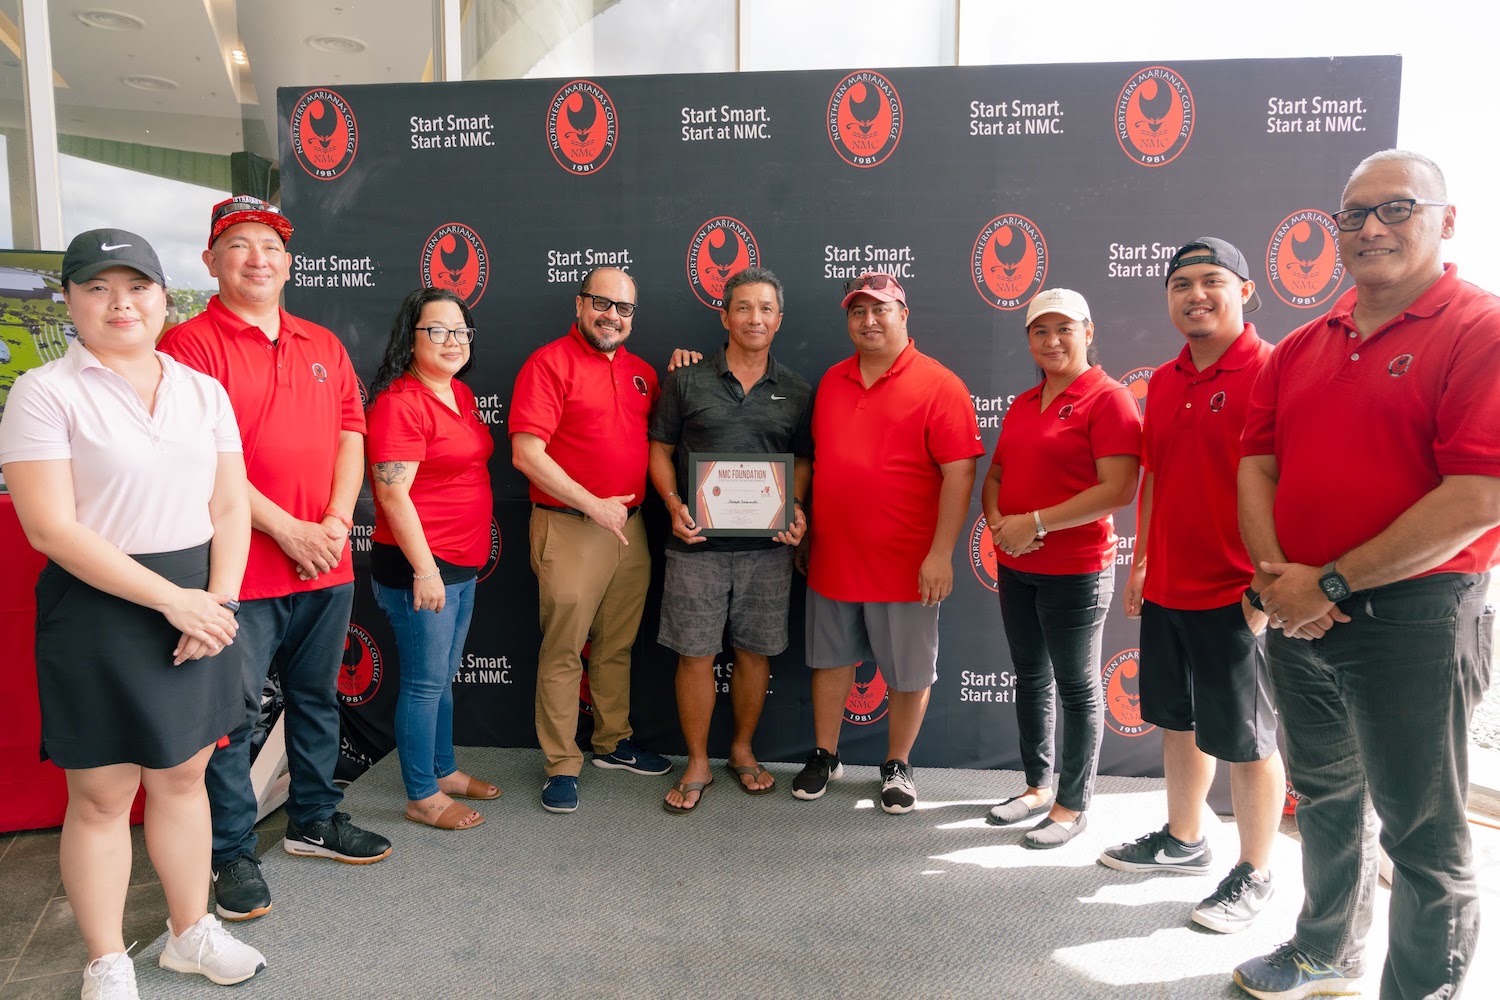 Joseph Sasamoto, center and the Senior Flight winner of the 17th Annual NMC Foundation Golf Tournament, poses with, from left, Northern Marianas College regents Michelle Lin Sablan, Jesse Tudela, and Zenie Mafnas, NMC president Galvin Deleon Guerrero, Gov. Ralph DLG Torres, NMC regent Irene Torres, NMC Foundation board member Roman Tudela, and NMC Board of Regents chair Charles Cepeda during the awards ceremony last Saturday at the Laolao Bay Golf & Resort. (NMC)